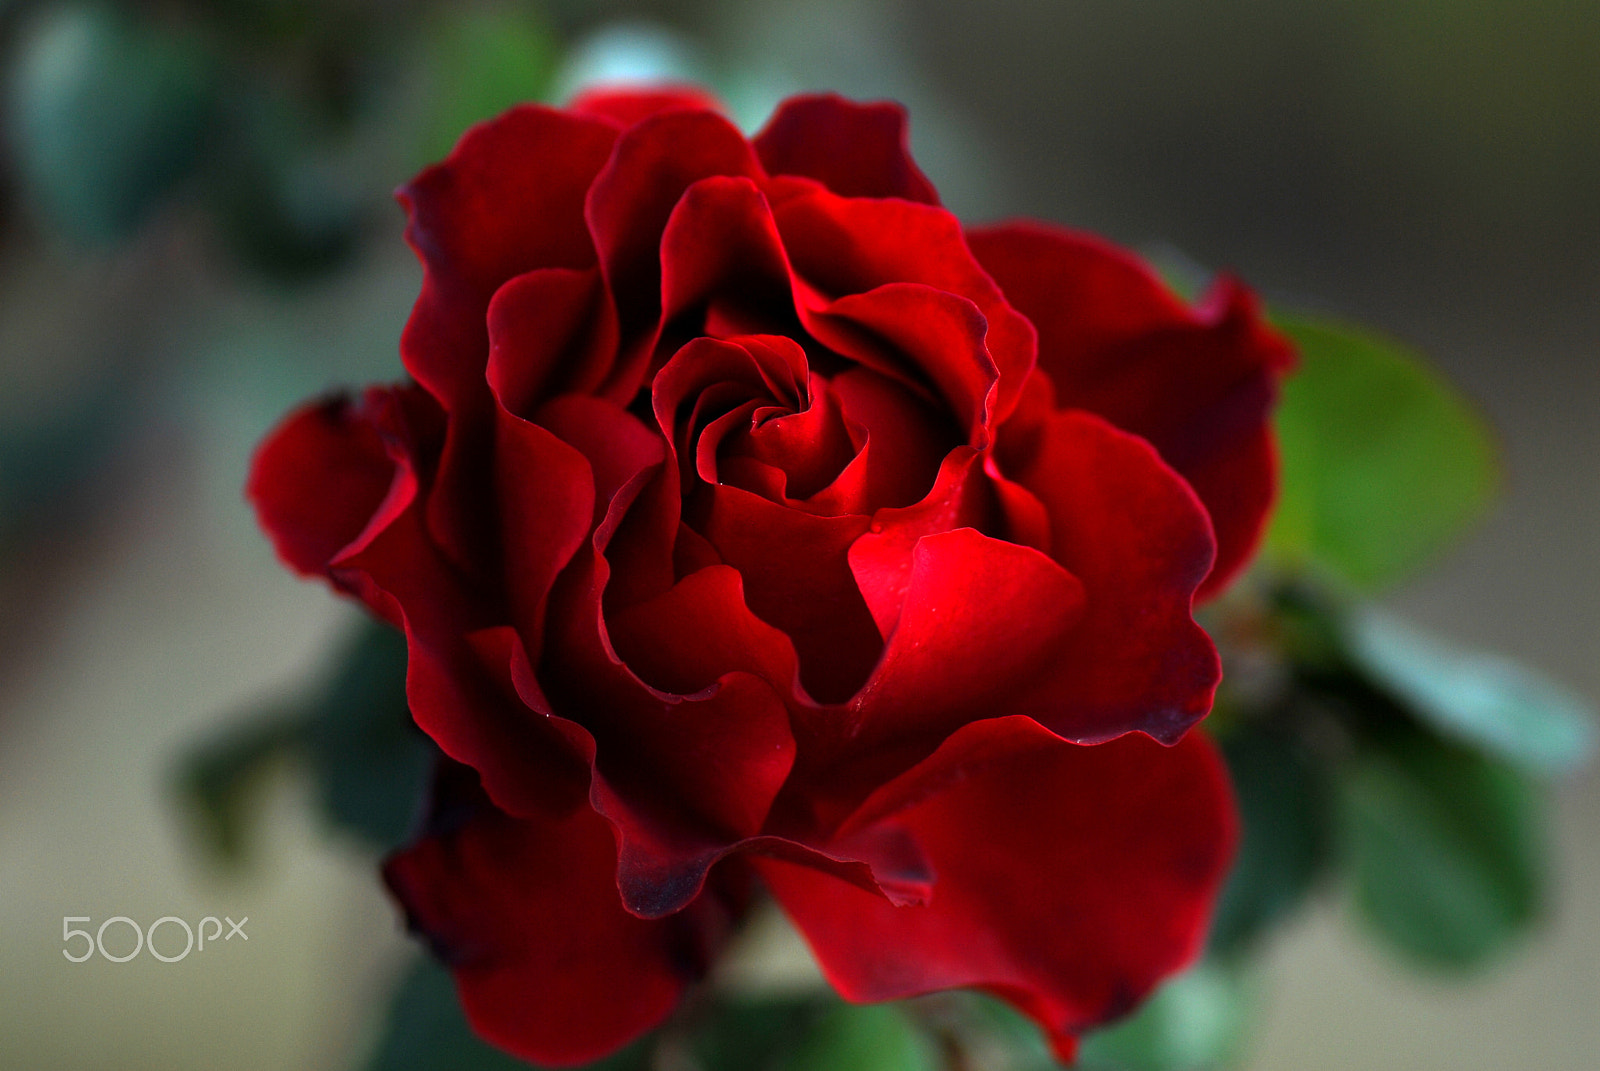 Nikon D200 sample photo. Red rose in winter photography